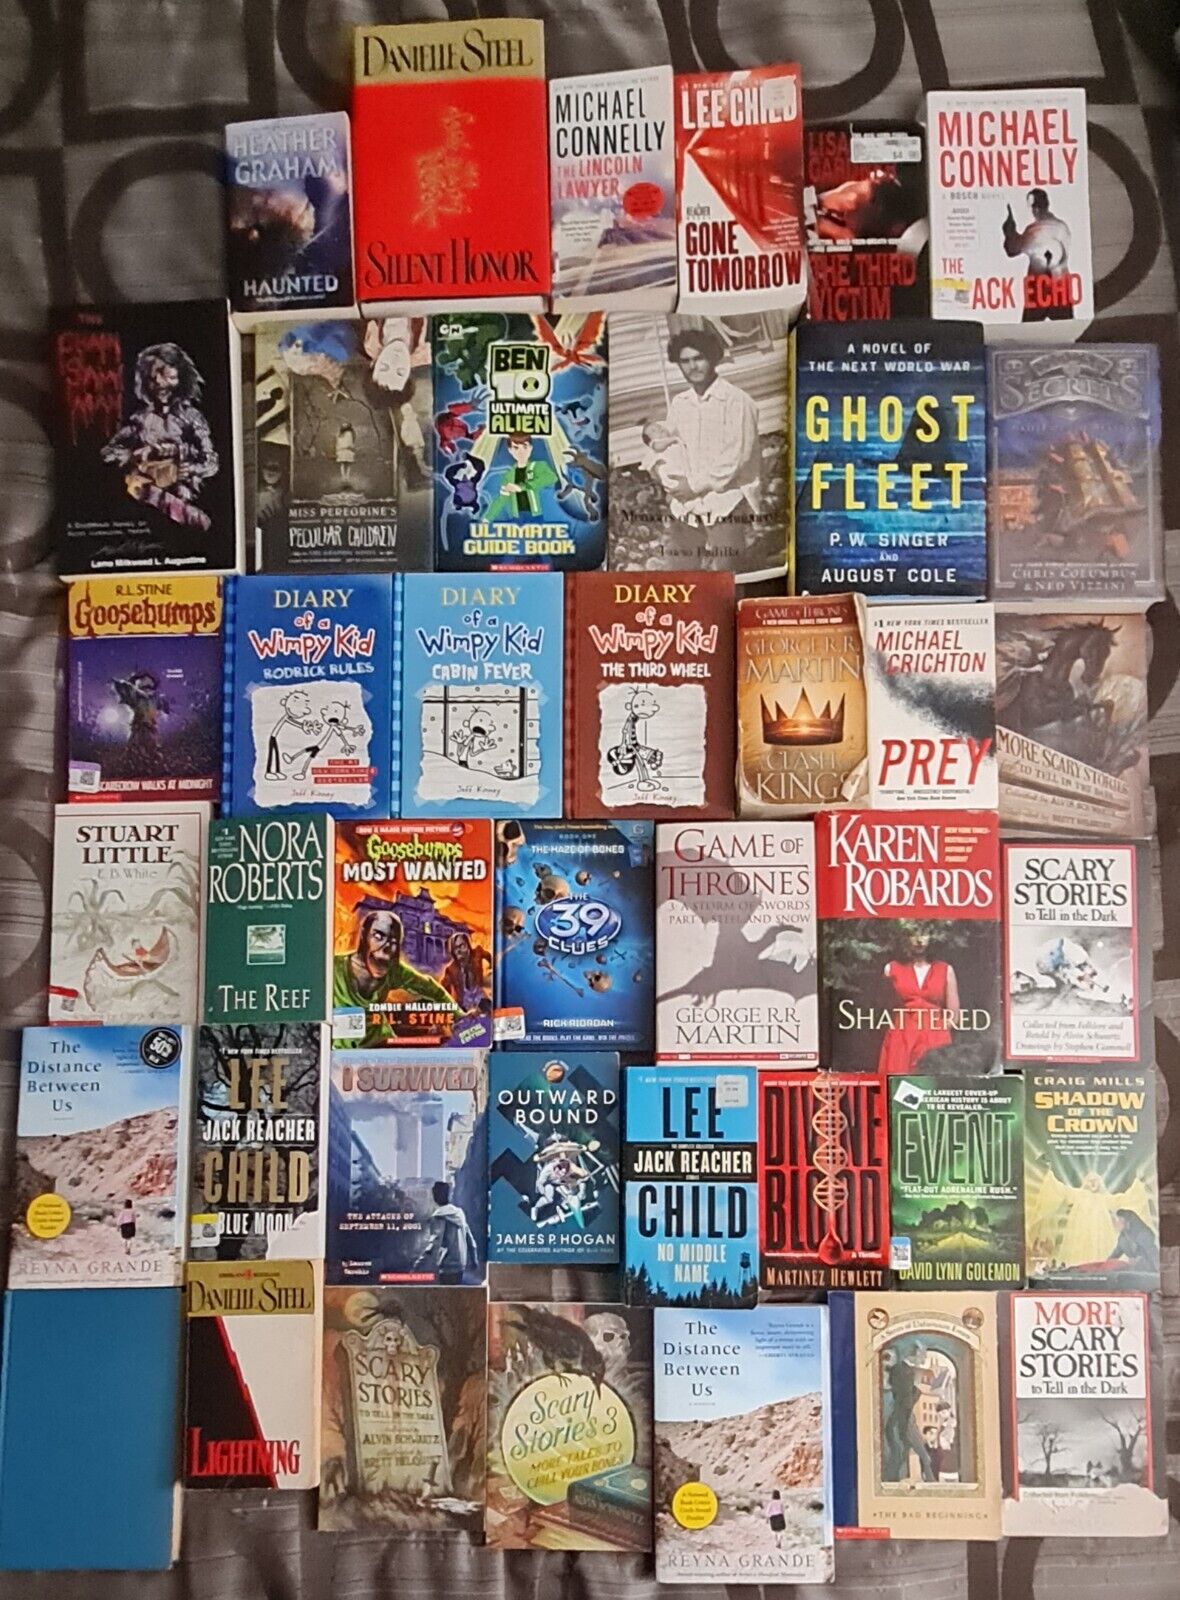 Collection of Books (Game of Thrones, Jack Reacher, Diary of a Wimpy Kid, etc)